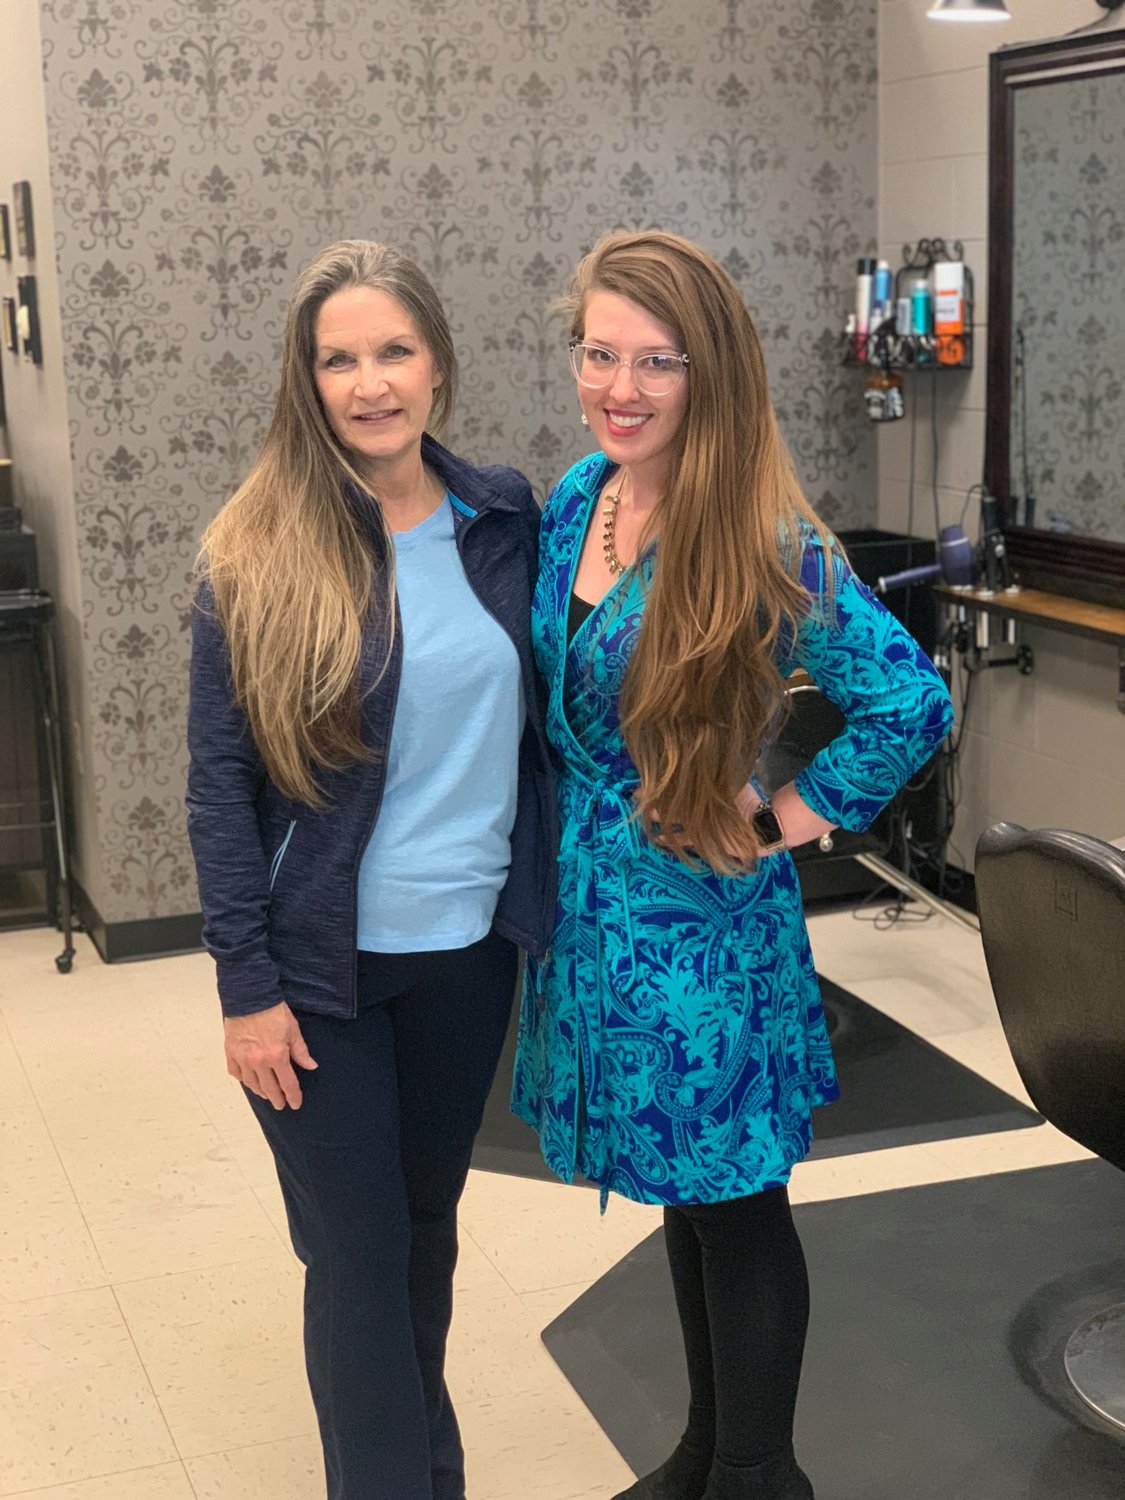 Annette Smith, left, and Dr. Misty Todd show off their long locks before having their hair cut at The Parlour hair salon in Sedalia. Smith and Todd work at Bothwell Regional Health Center and teamed up to donate their cut hair to Wigs for Kids, a nonprofit organization that provides wigs to children free of charge.